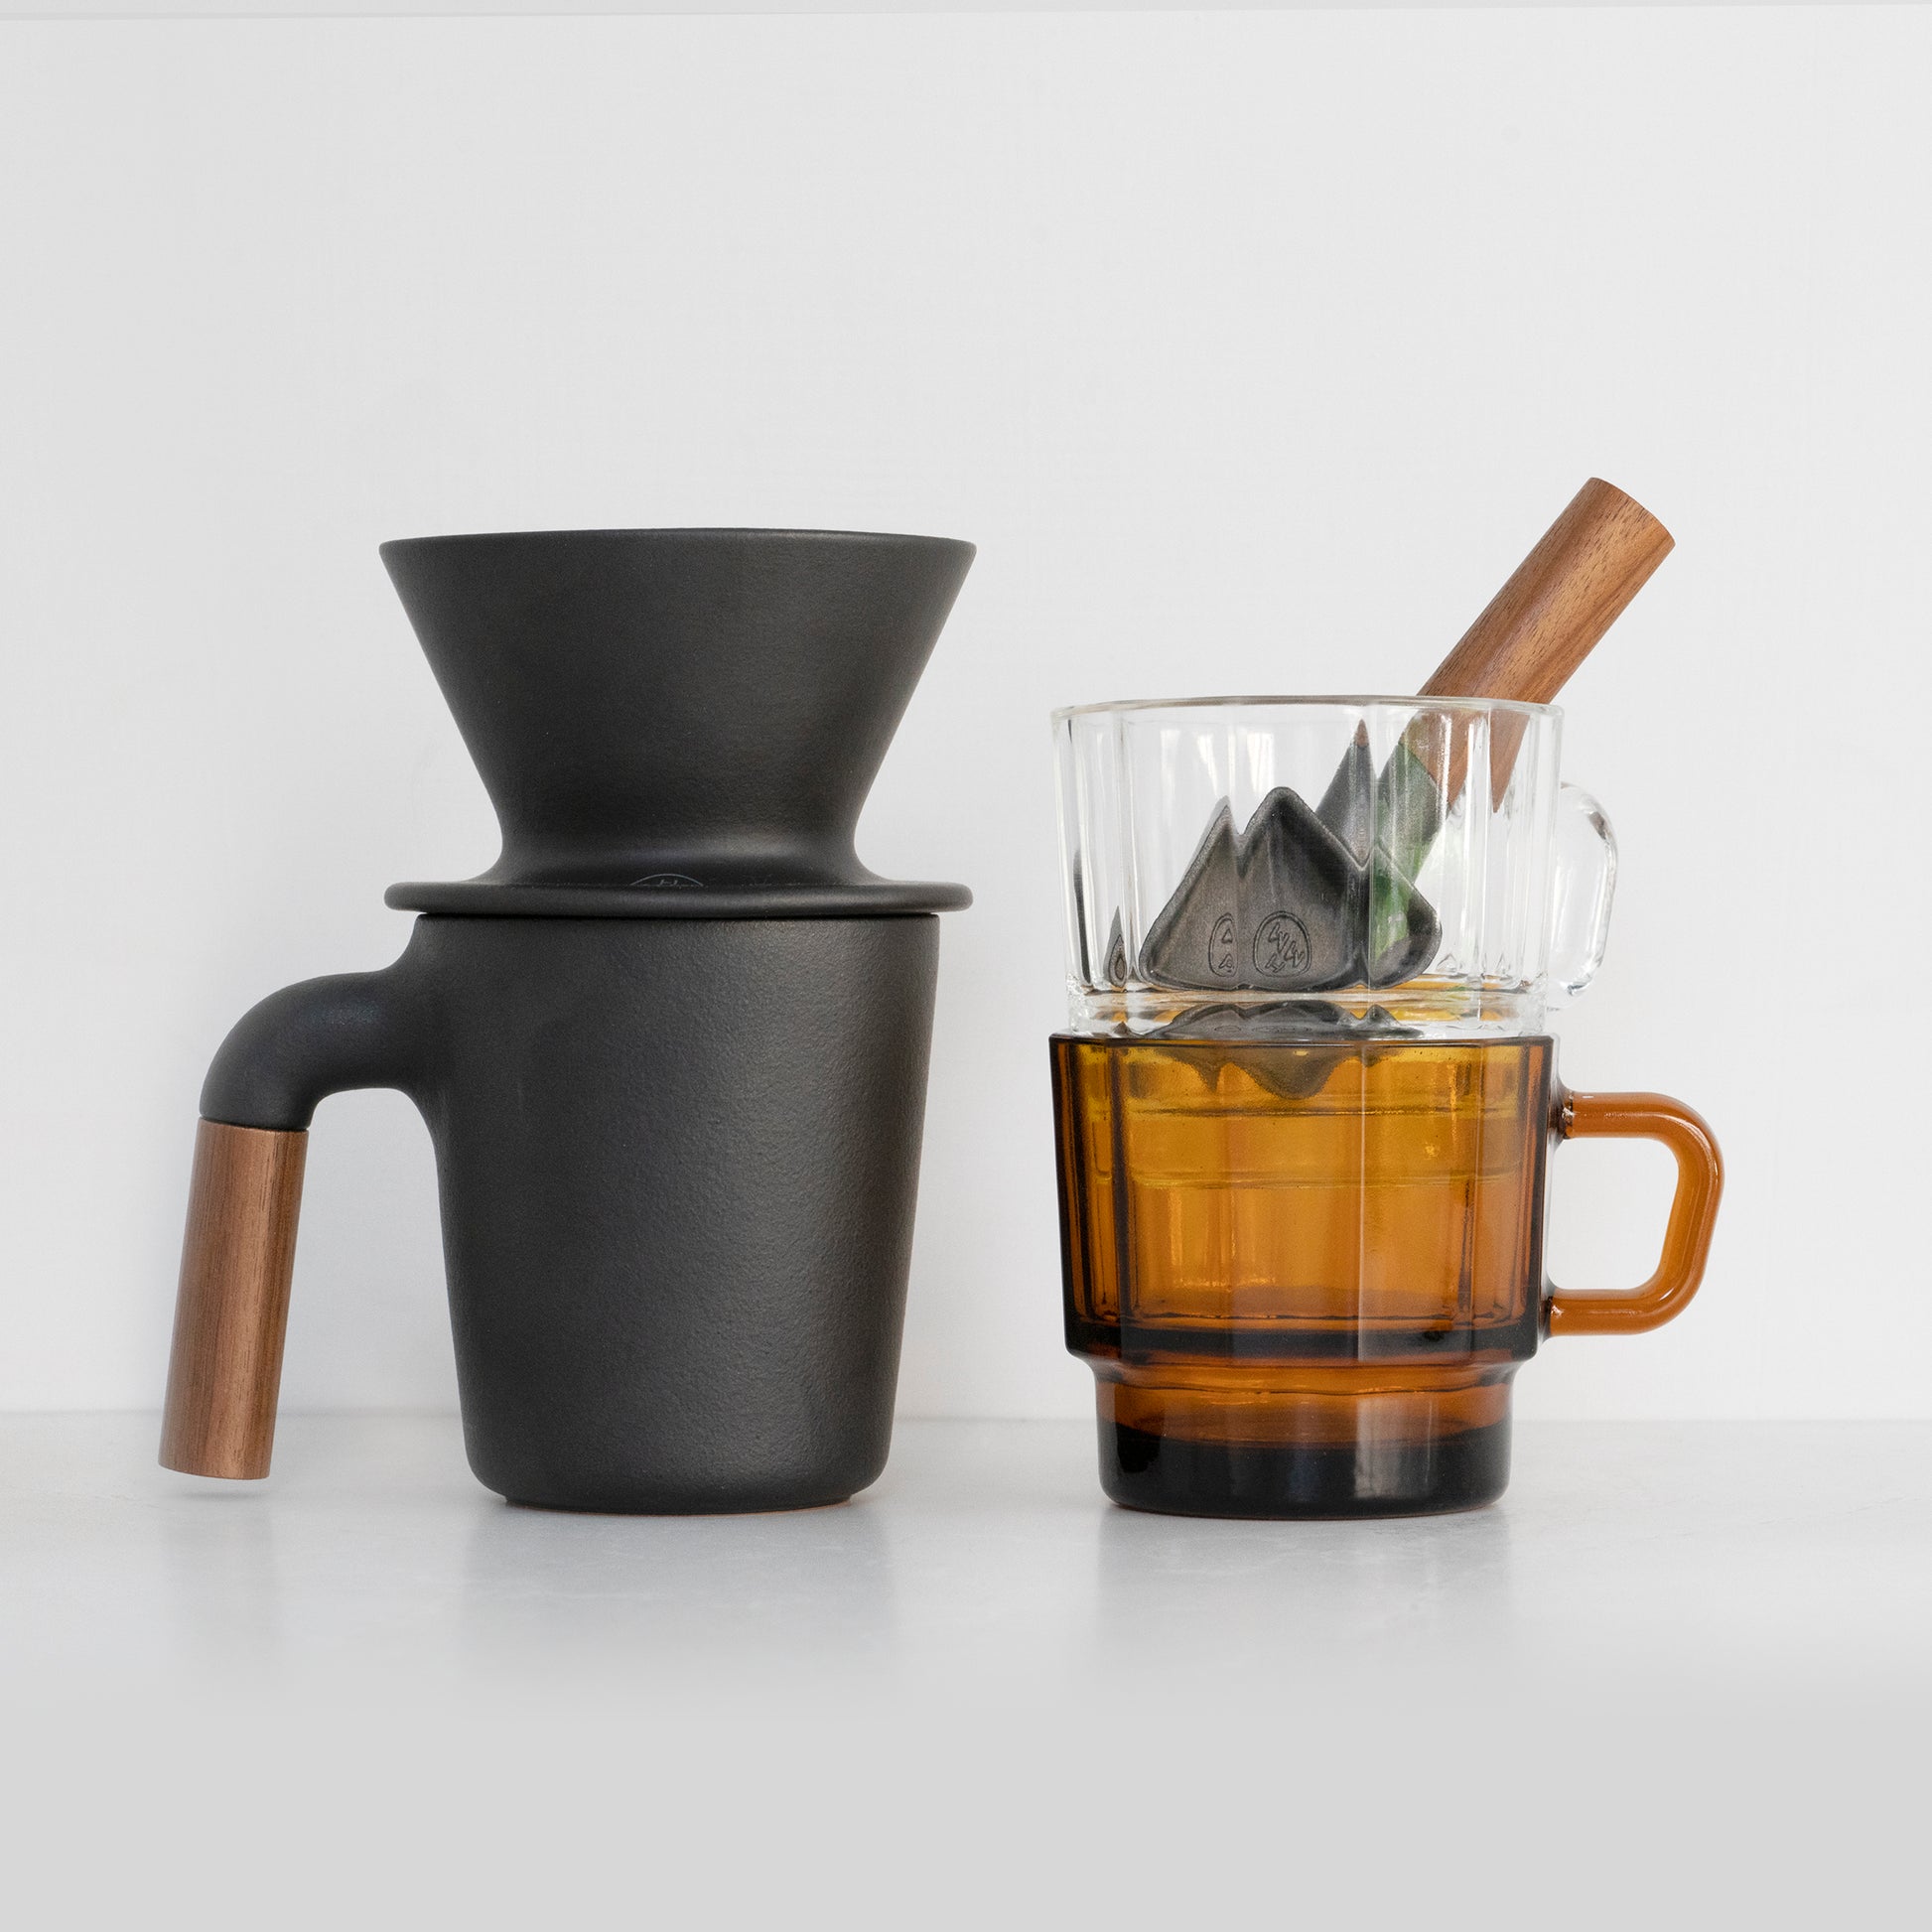 HMM coffee collection with ceramic mug, dripper, cast iron coffee scoop and recycled glass cup.